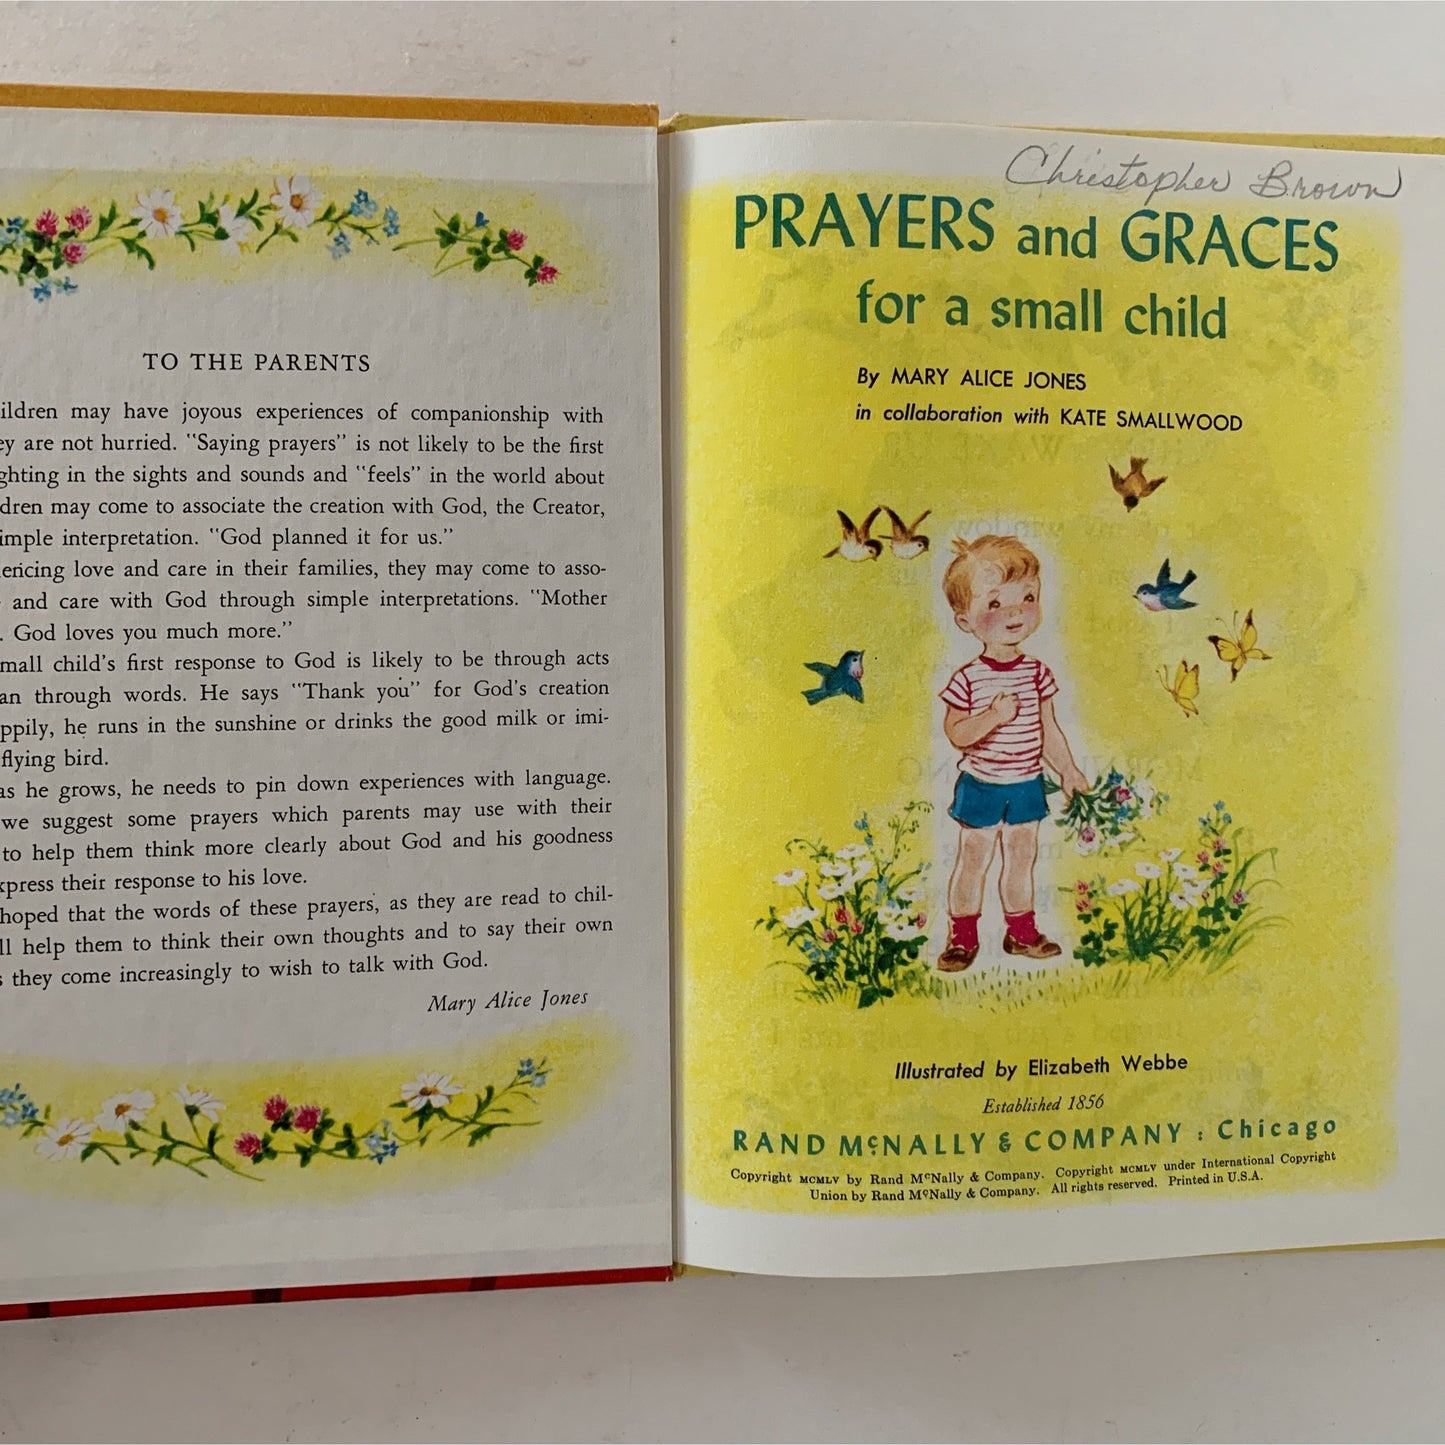 Prayers and Graces for a Small Child, A Rand McNally Book, Hardcover, 1955